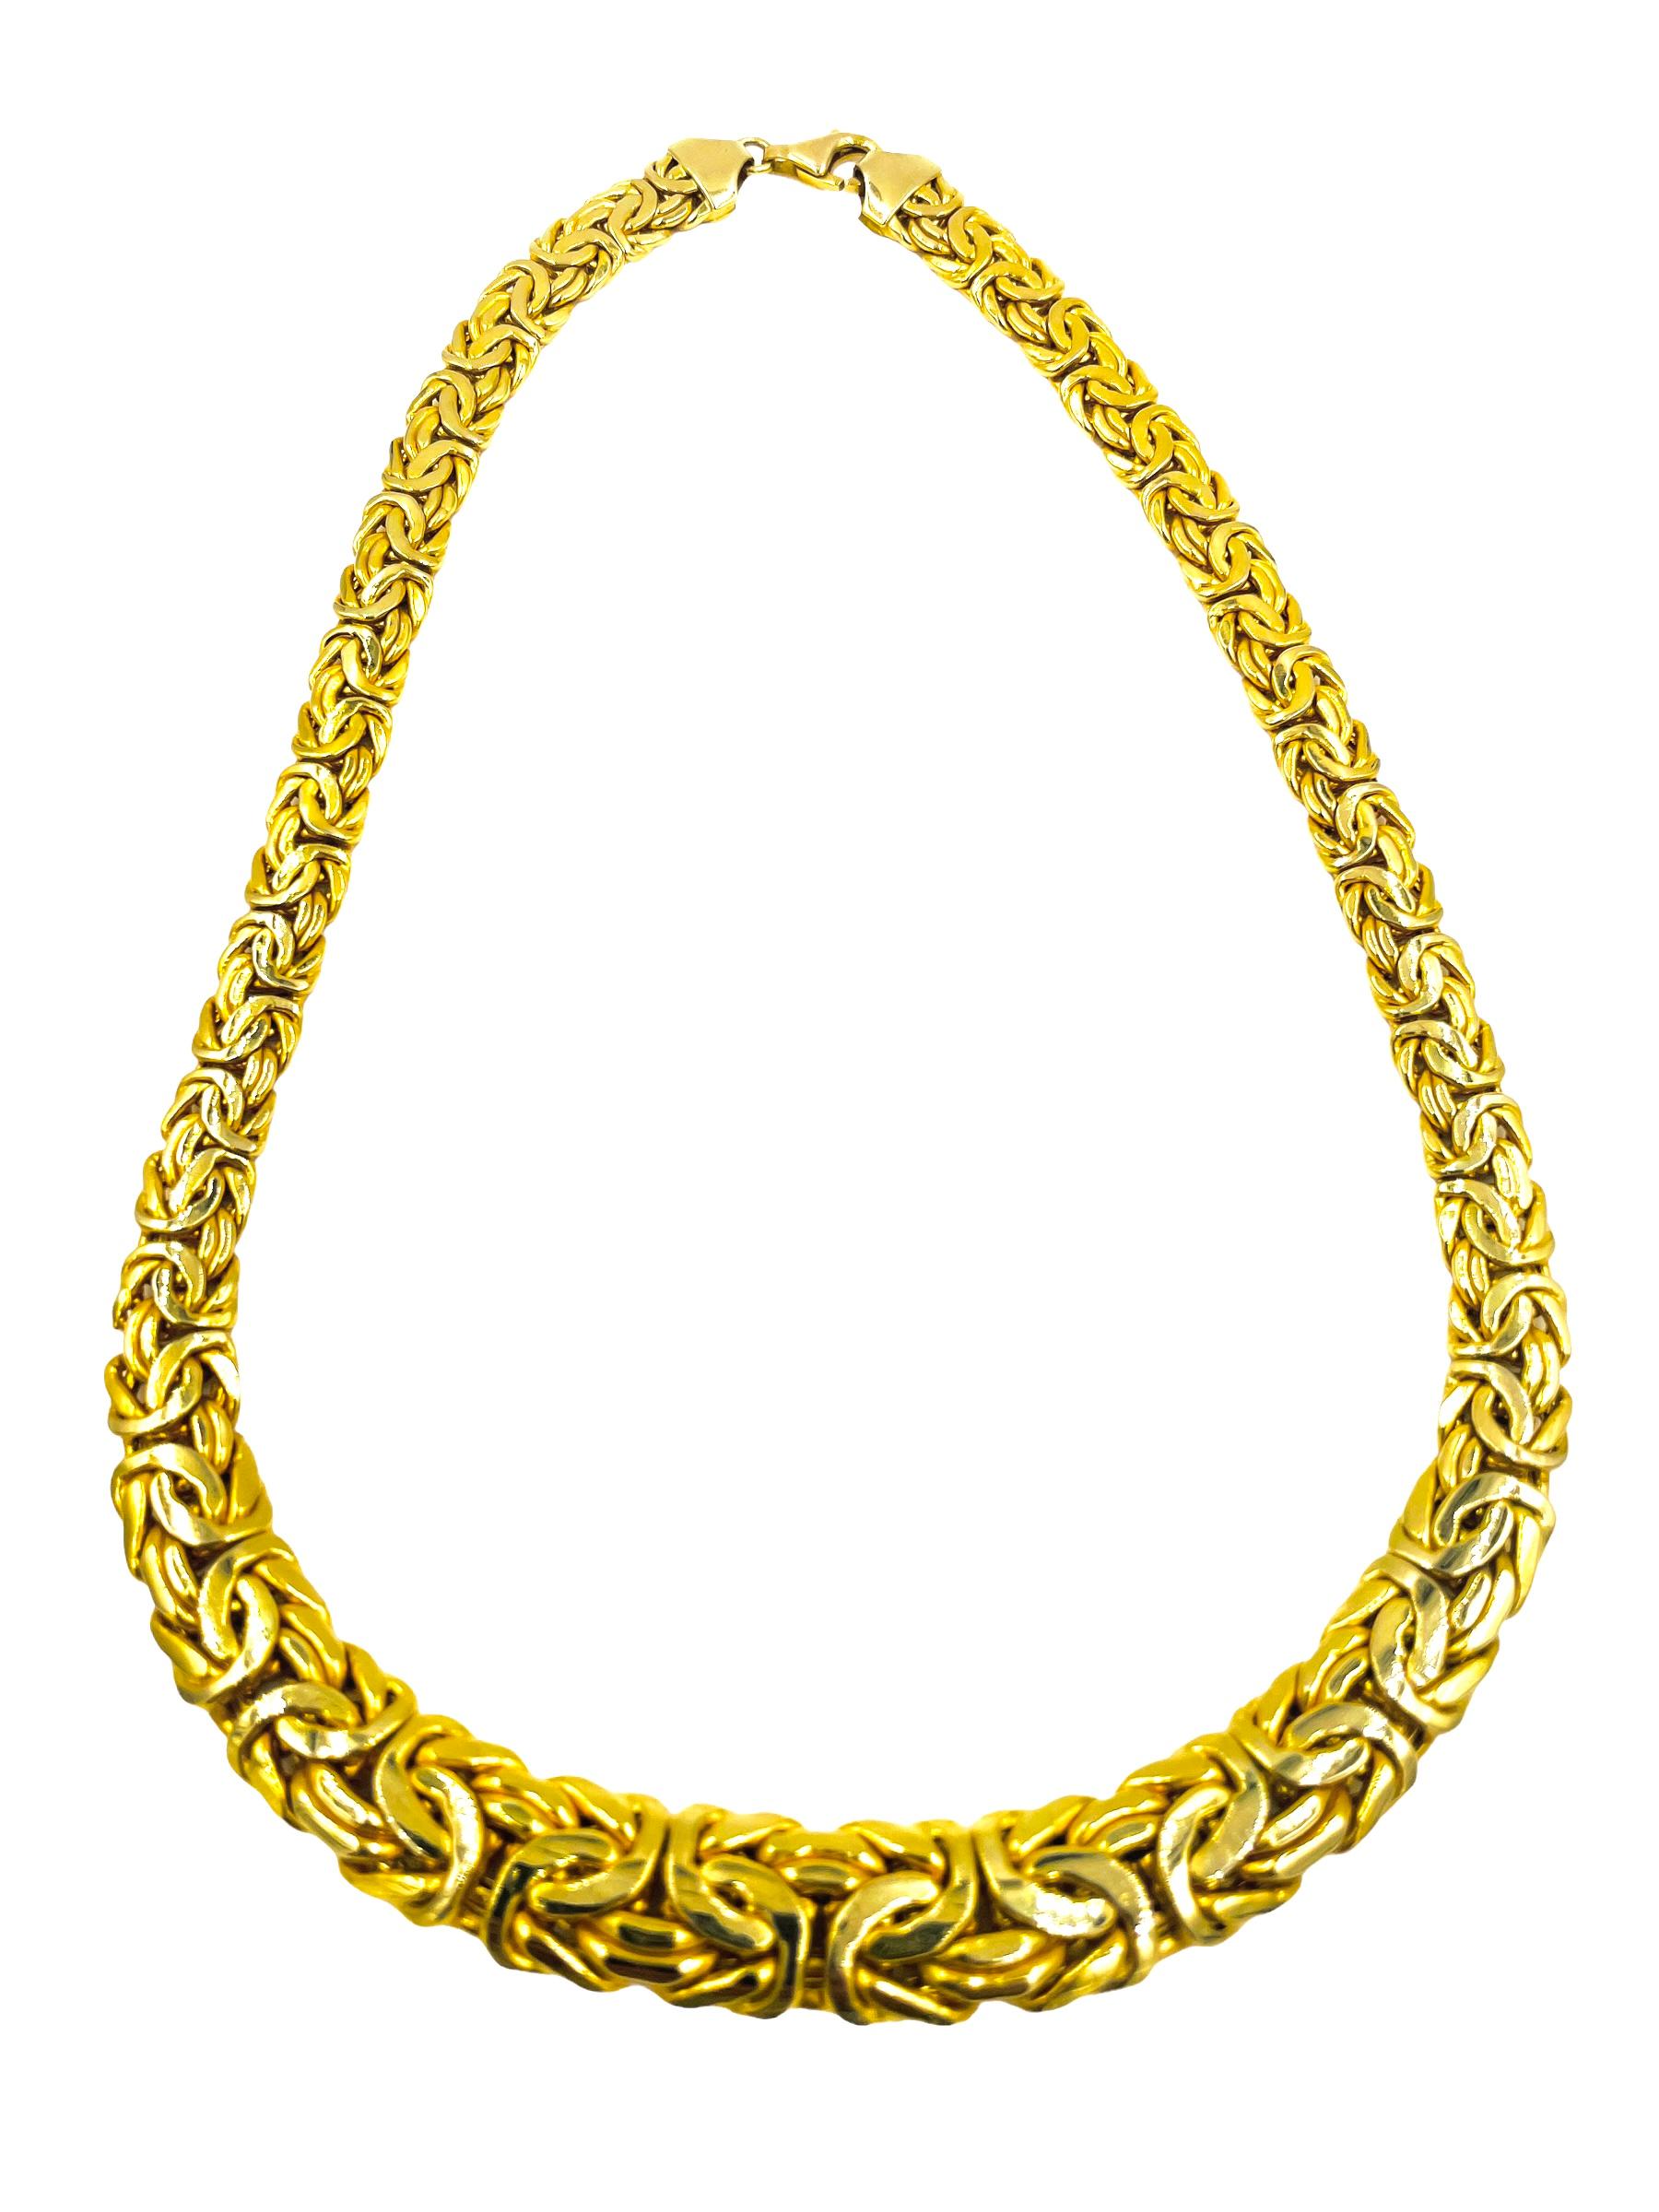 Byzantine Graduated Wide Yellow Gold Necklace

ABOUT THIS ITEM:   This woven byzantine necklace is a very classic necklace that can be worn every day.  Very comfortable and easy to wear.

 SPECIFICATIONS:

METAL:  14-karat yellow gold.

WEIGHT: 